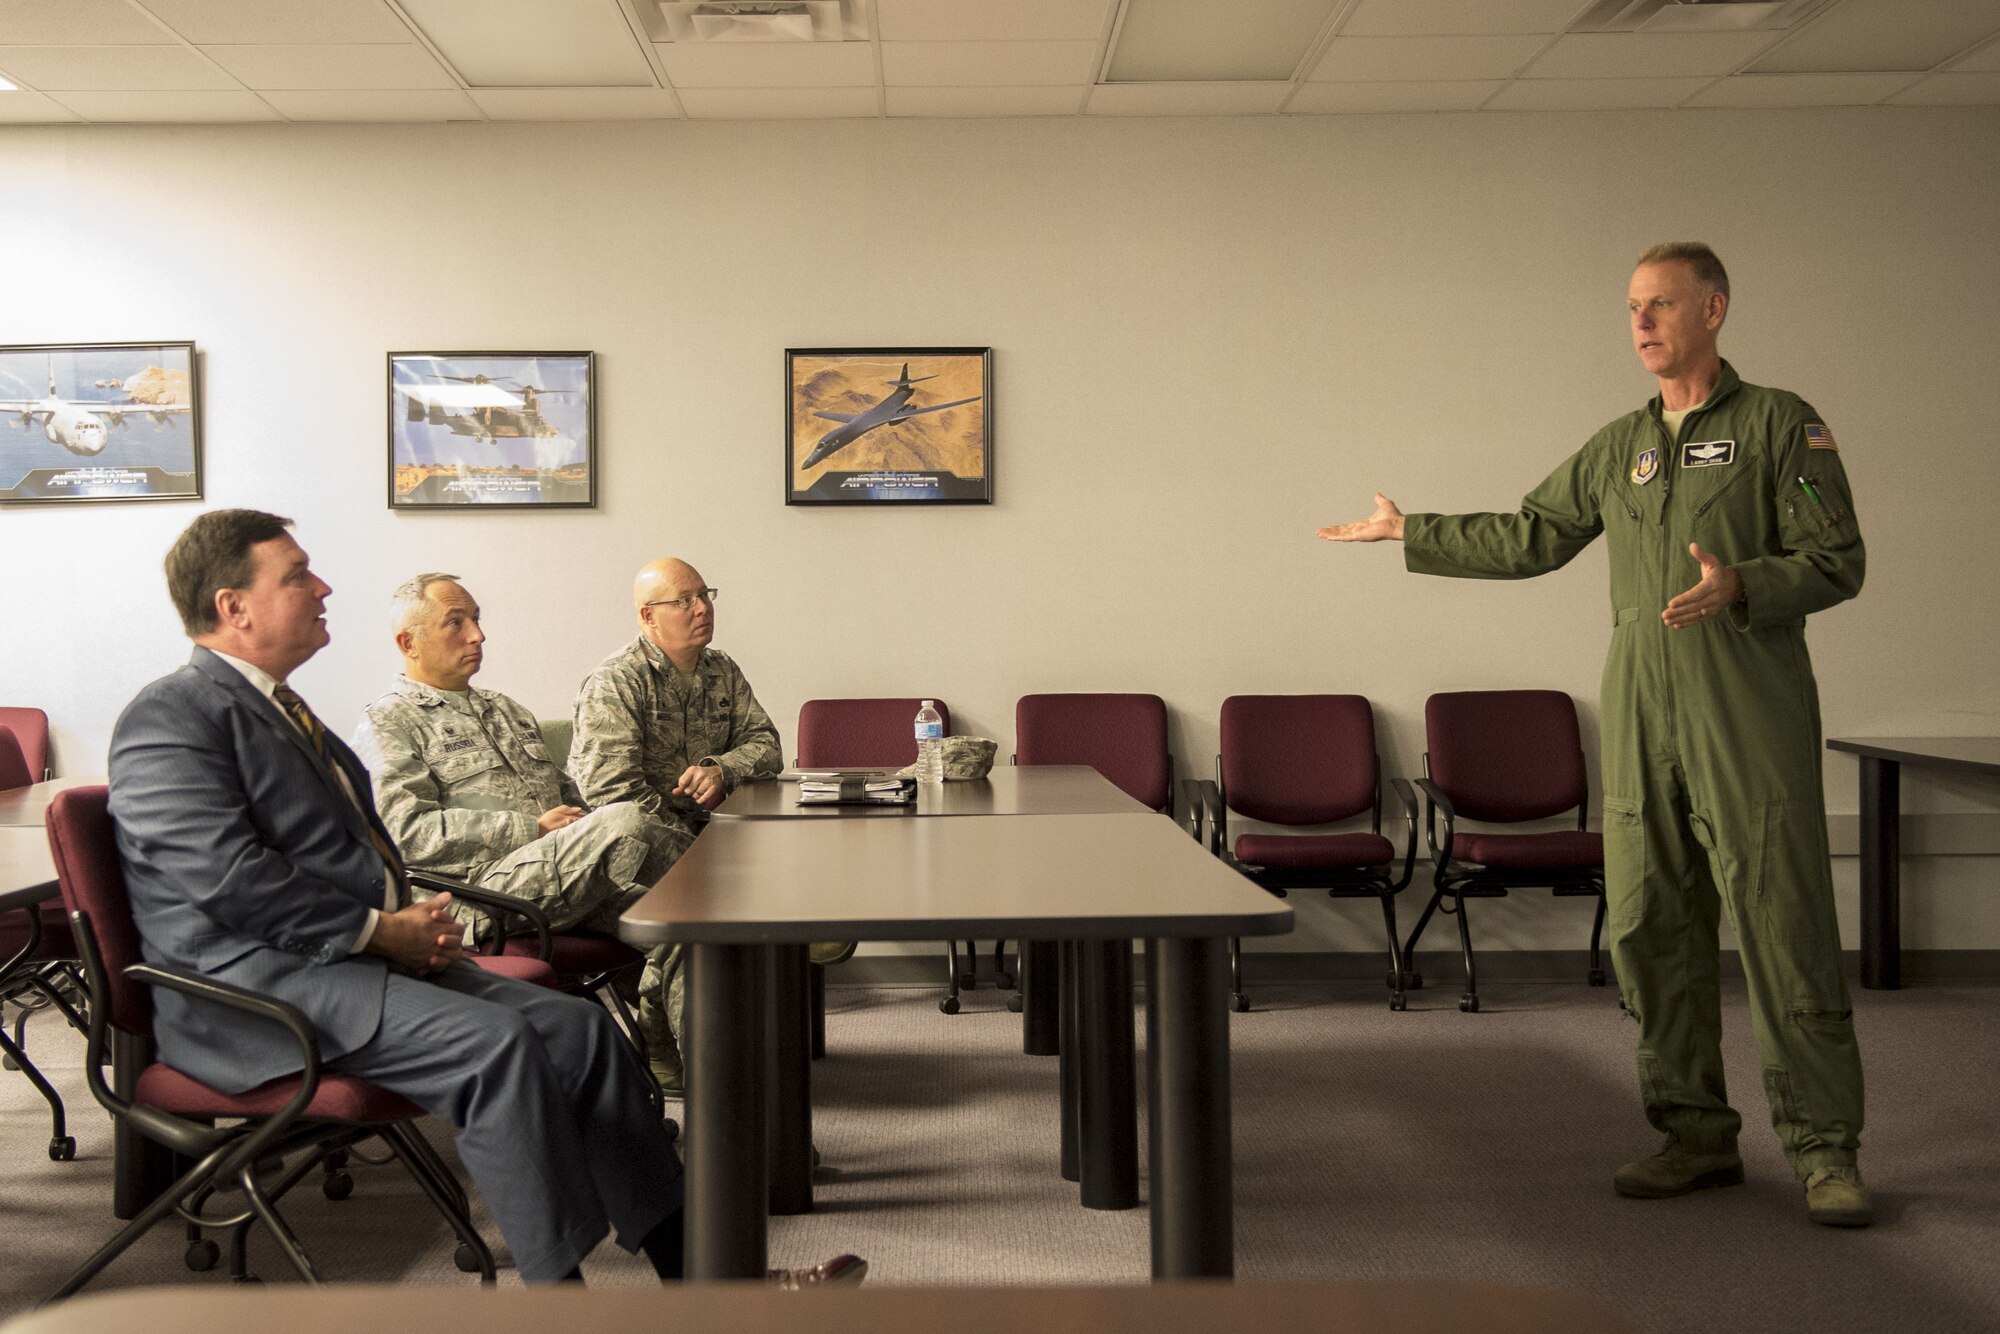 Col. Larry Shaw, 434th Air Refueling Wing commander, explains the base’s economic impact to U.S. Rep. Todd Rokita during a mission briefing at Grissom Air Reserve Base, Ind. Nov. 21, 2017. During the briefing Rokita also learned more about the wing mission and its contribution to the Air Force’s global reach. (U.S. Air Force graphic/Tech. Sgt. Benjamin Mota)